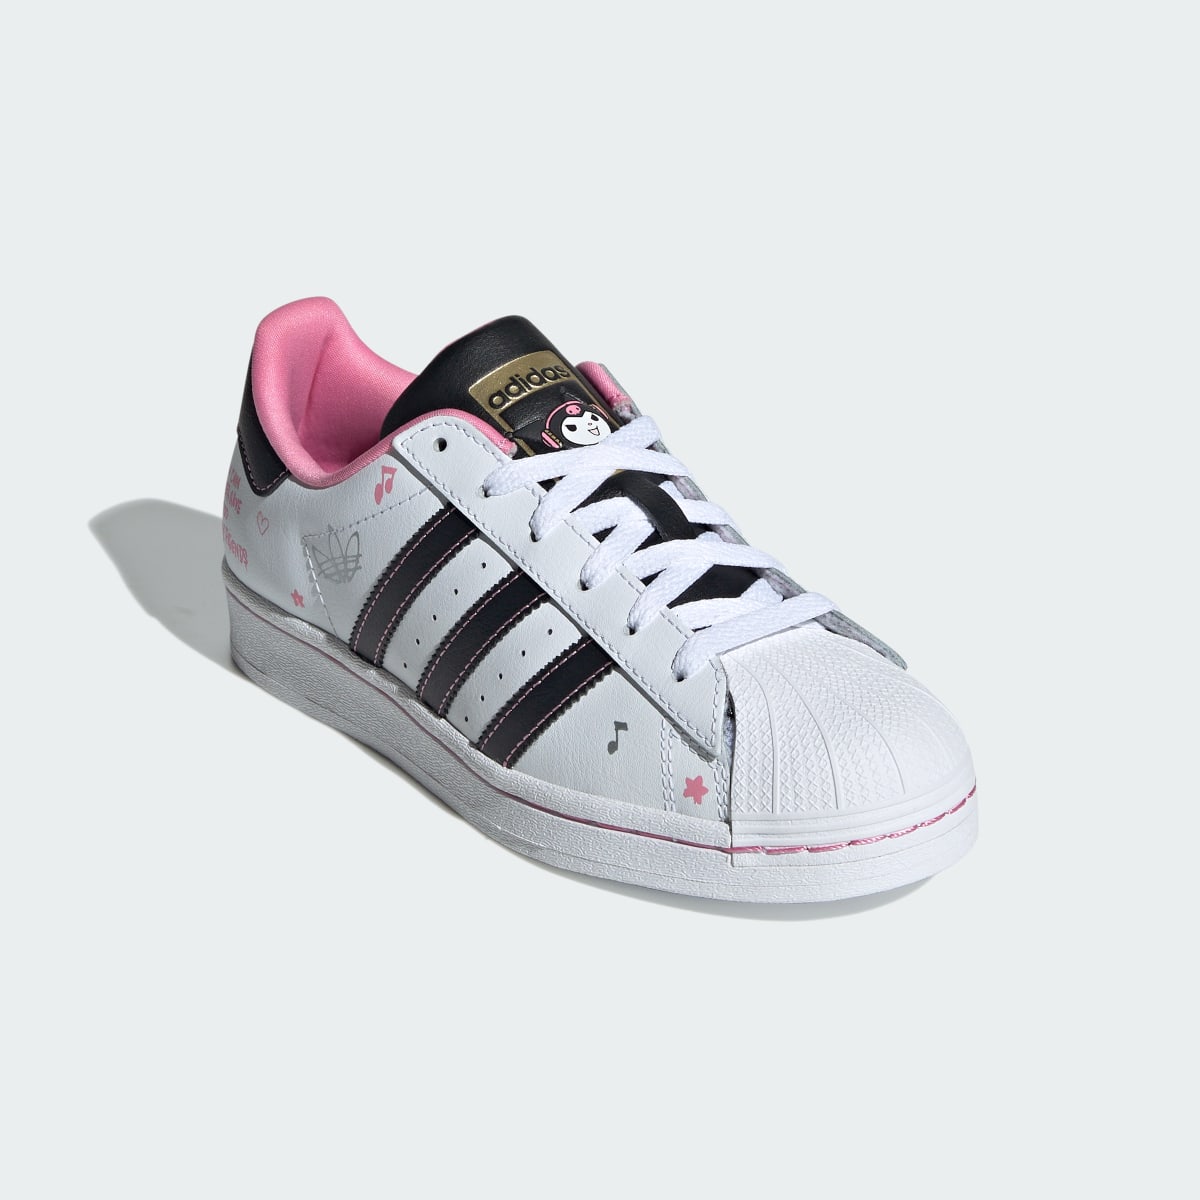 Adidas Originals x Hello Kitty and Friends Superstar Shoes Kids. 5